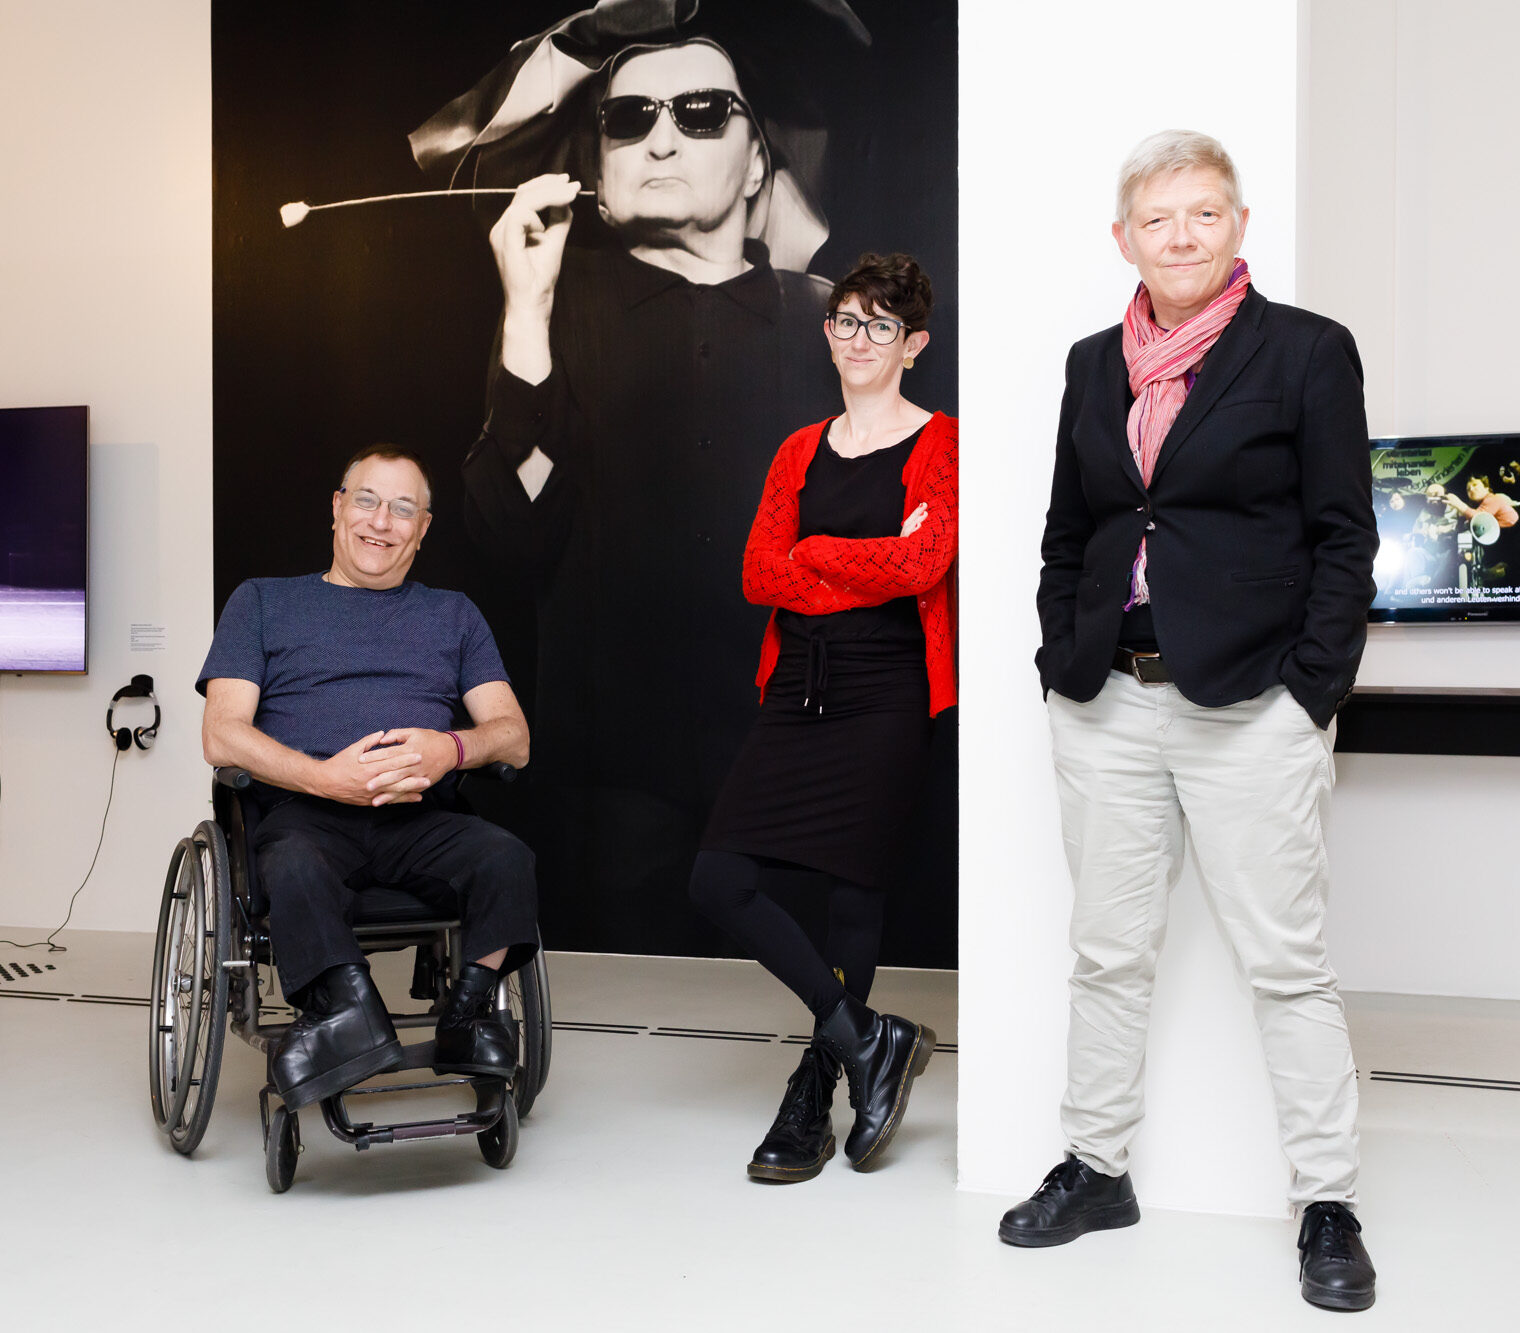 White man in a wheelchair and two white women stand in front of a large photograph of someone smoking 